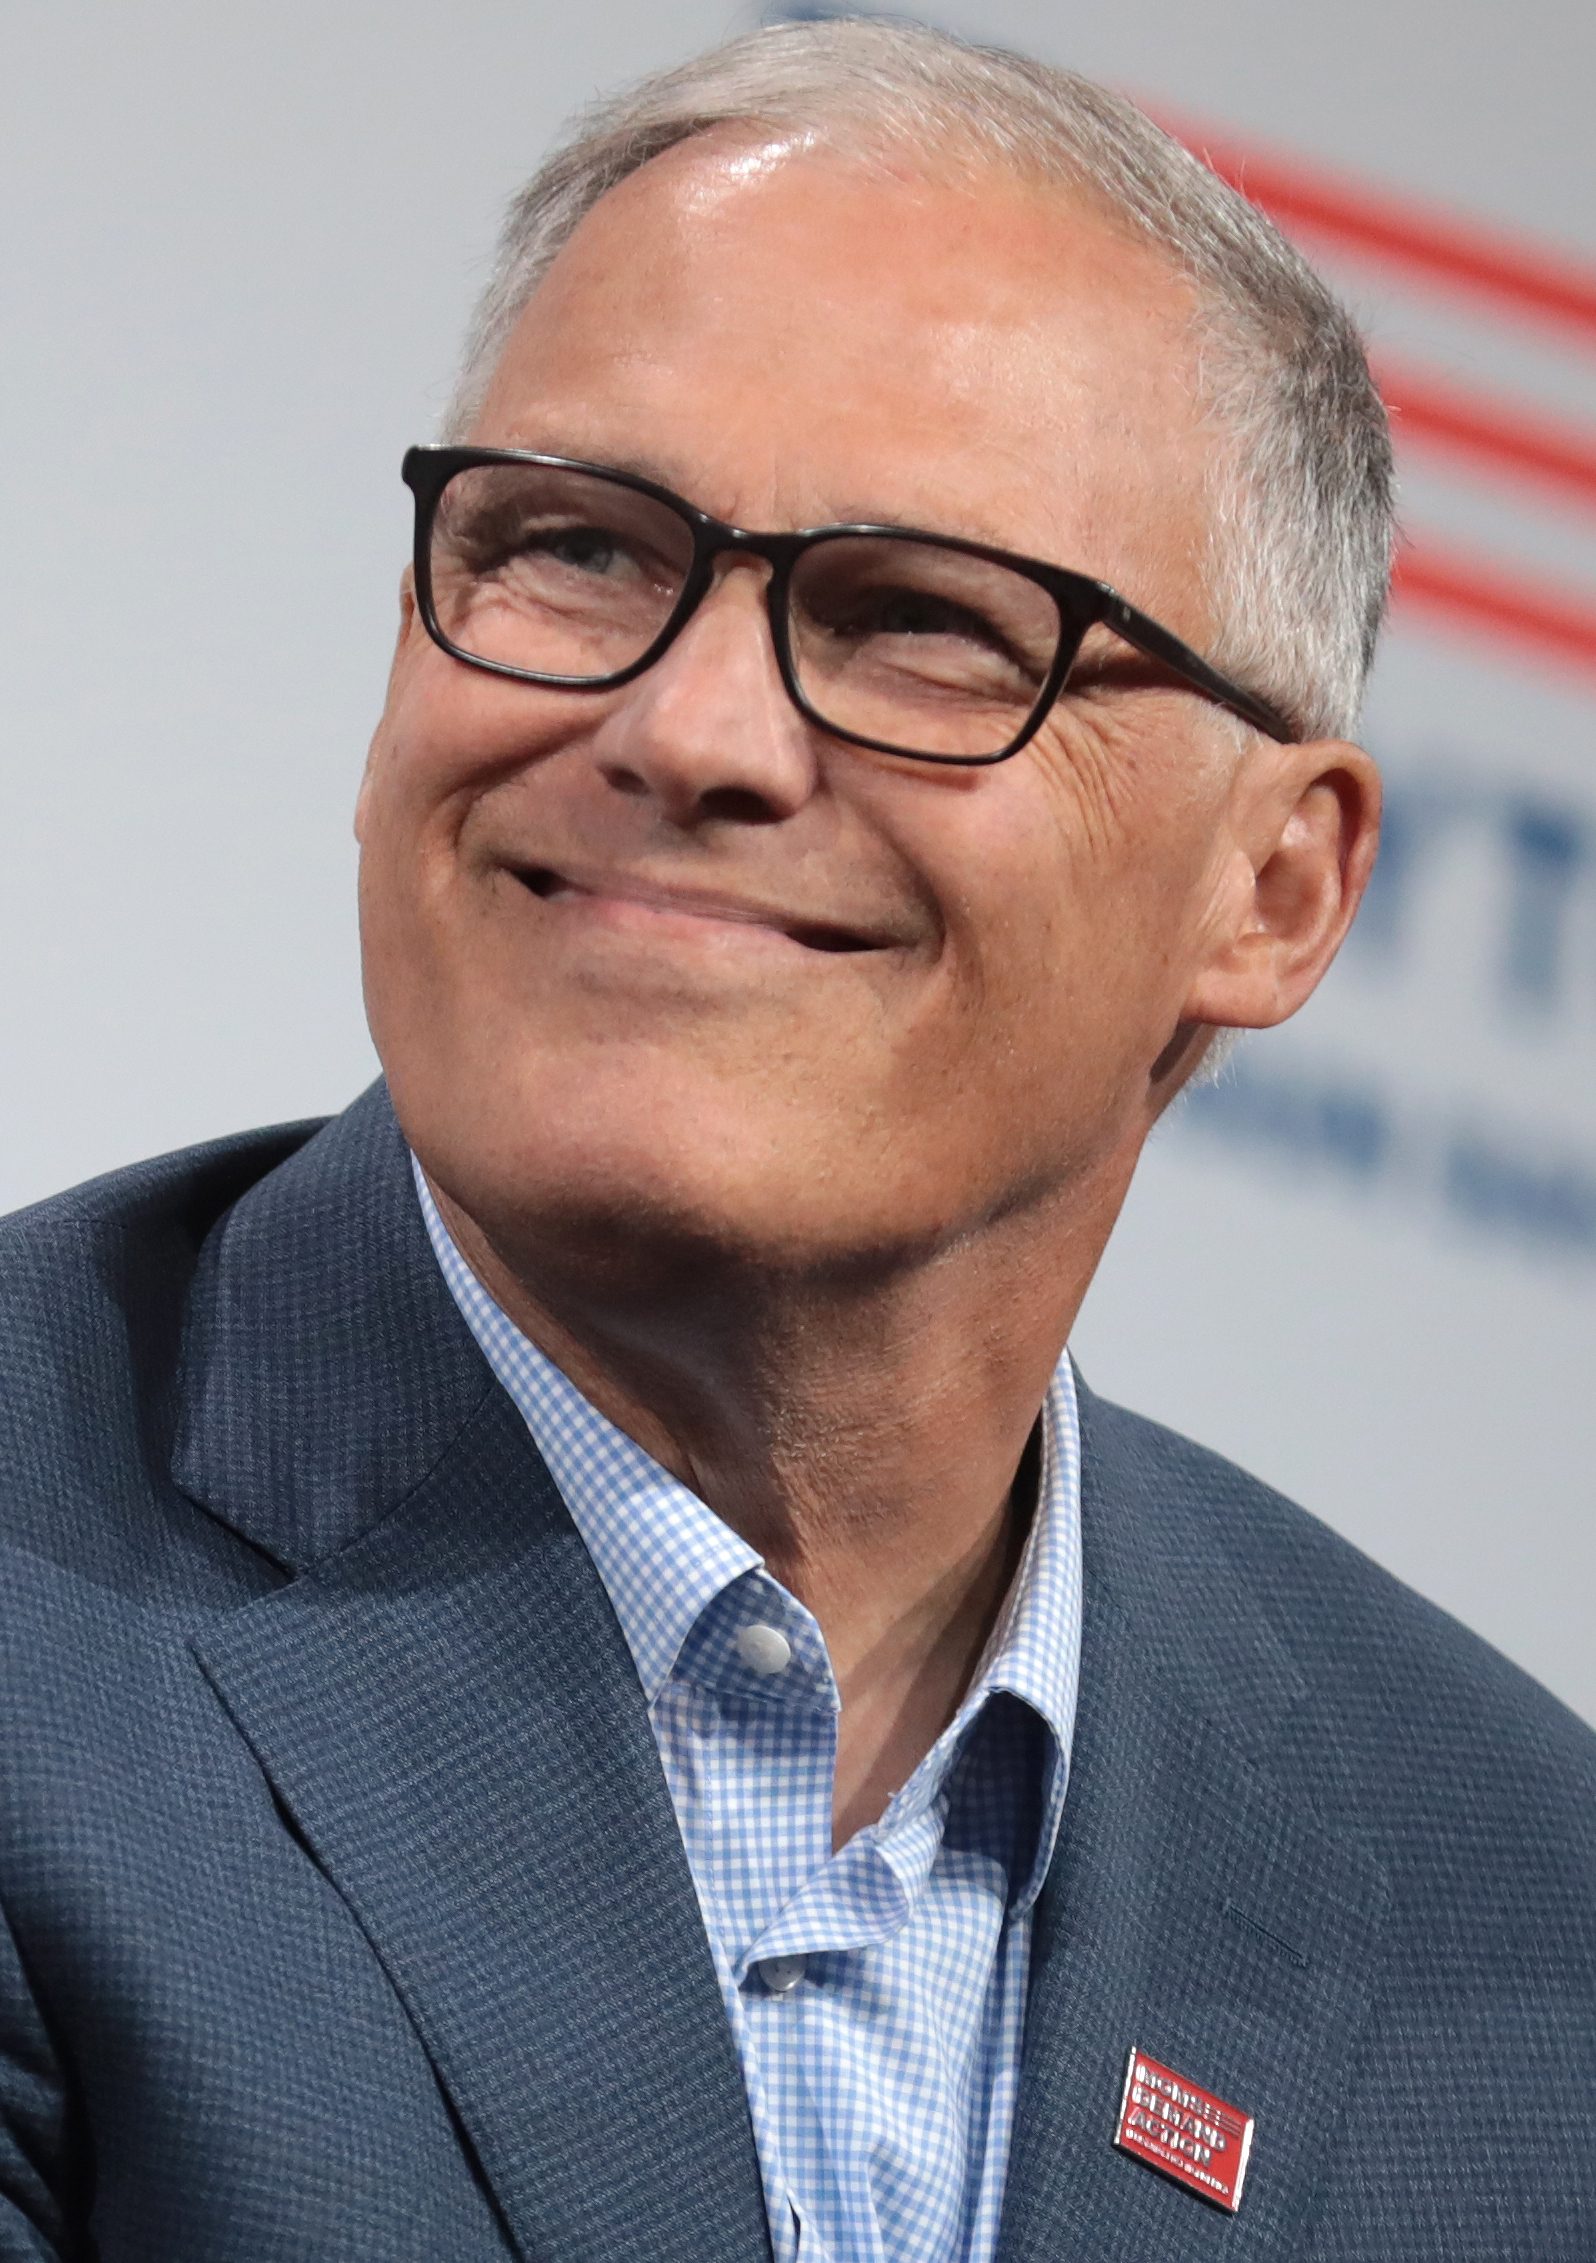 Jay_Inslee_(48609757392)_(cropped)